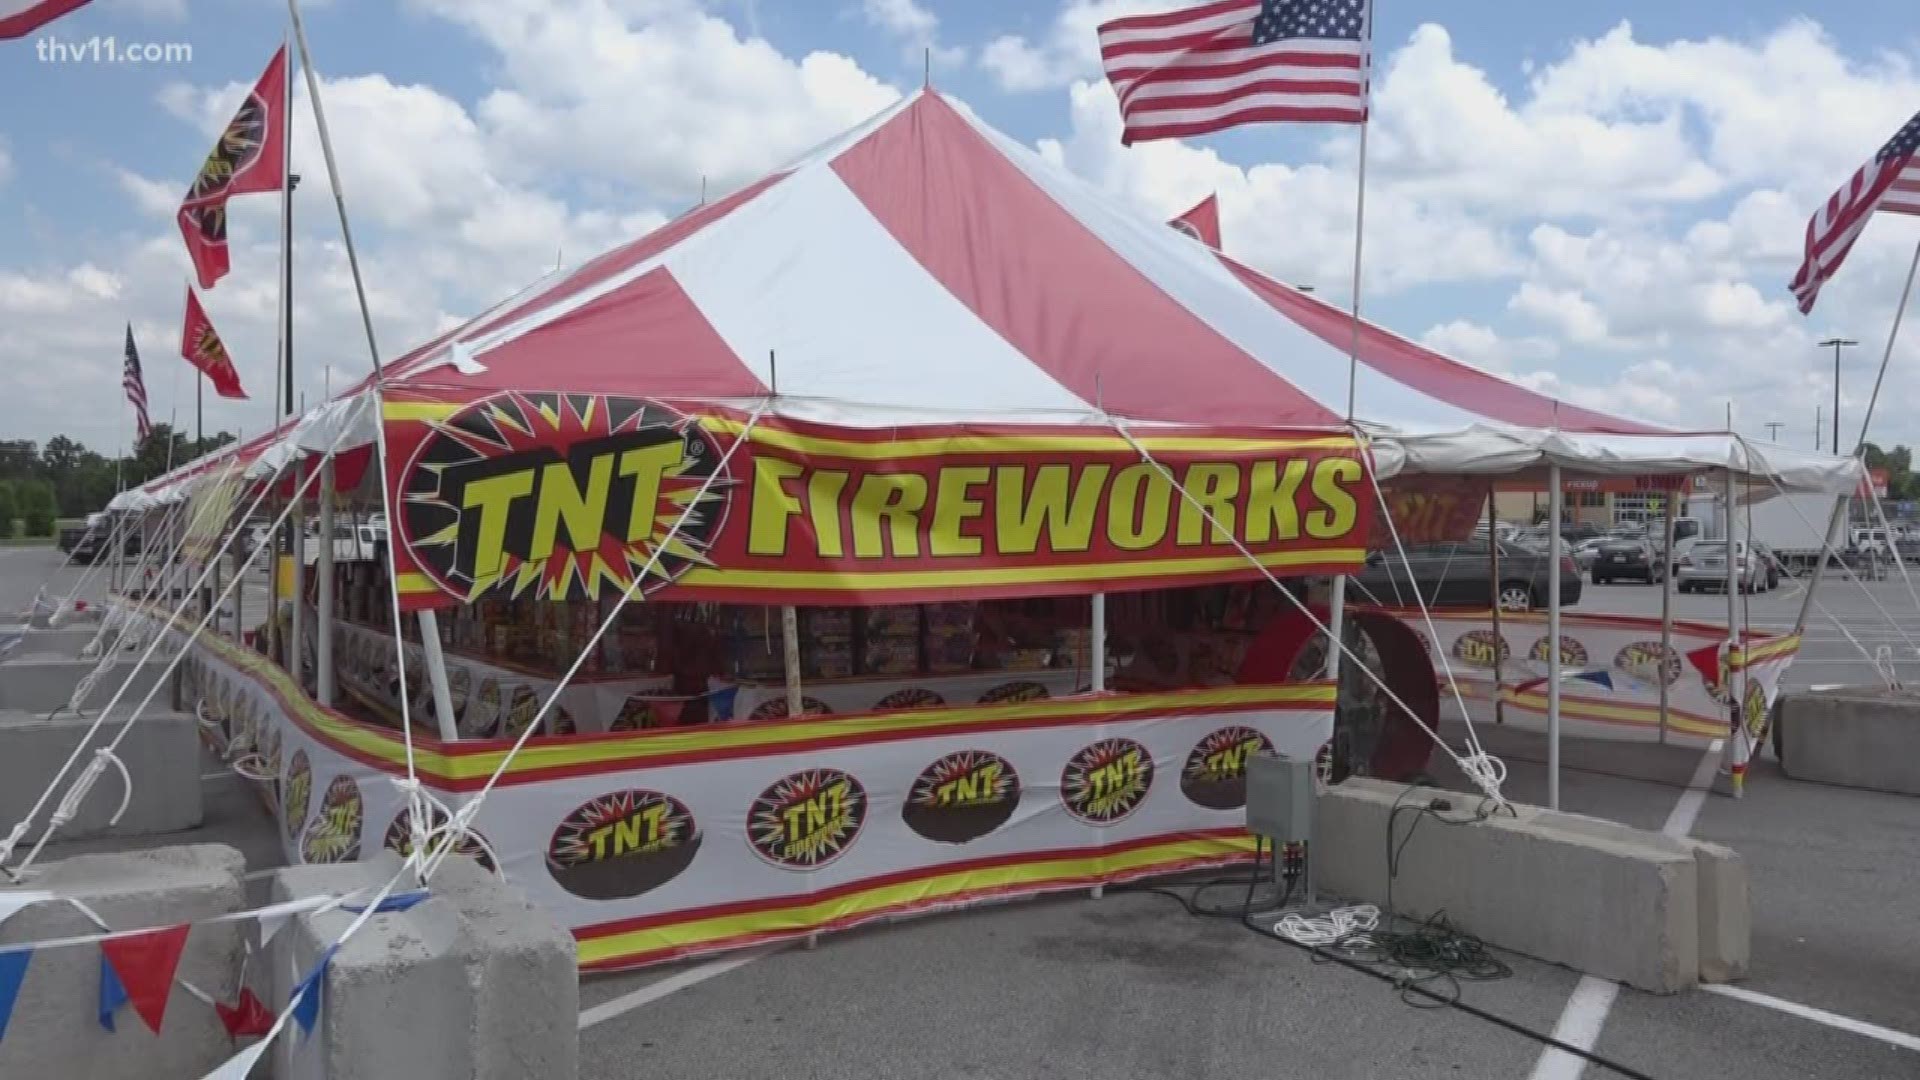 You've likely seen fireworks stands popping up near county lines. One Springdale family started selling fireworks to pay for their daughters' wedding.